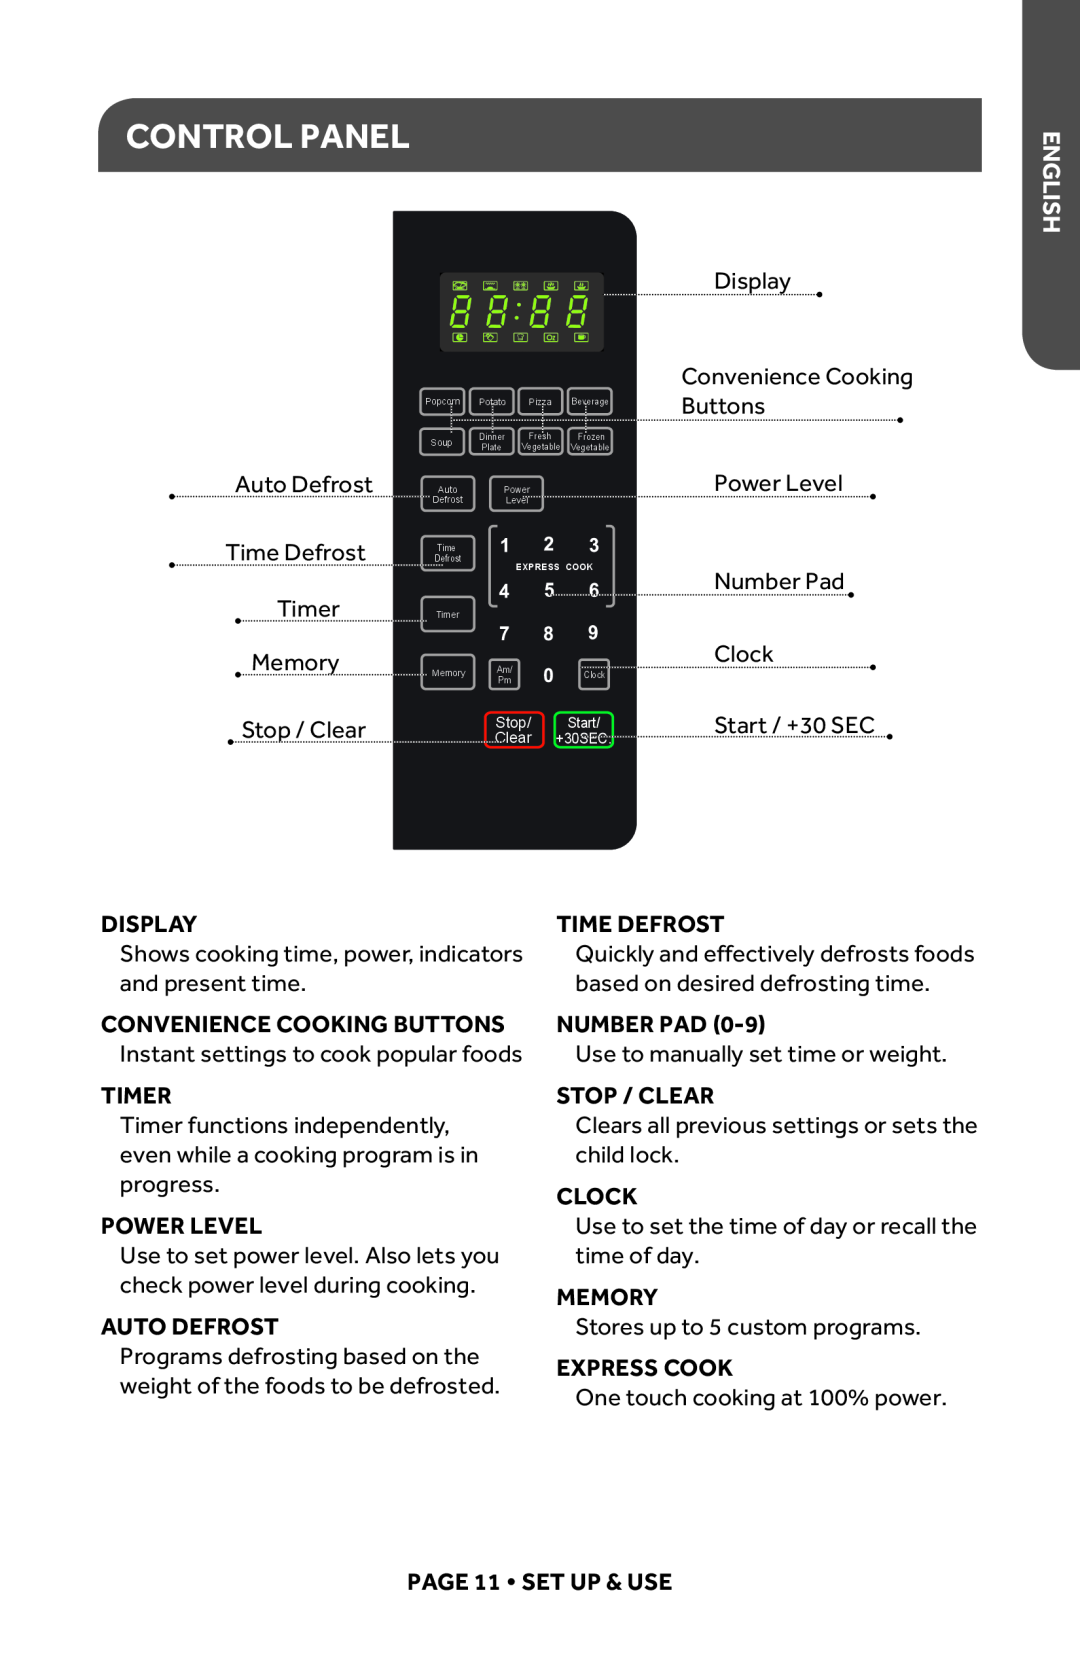 Haier HMC1035SESS Control Panel, English, Display, Buttons, Power Level, Number Pad, Clock, Start / +30 SEC, Timer, Memory 